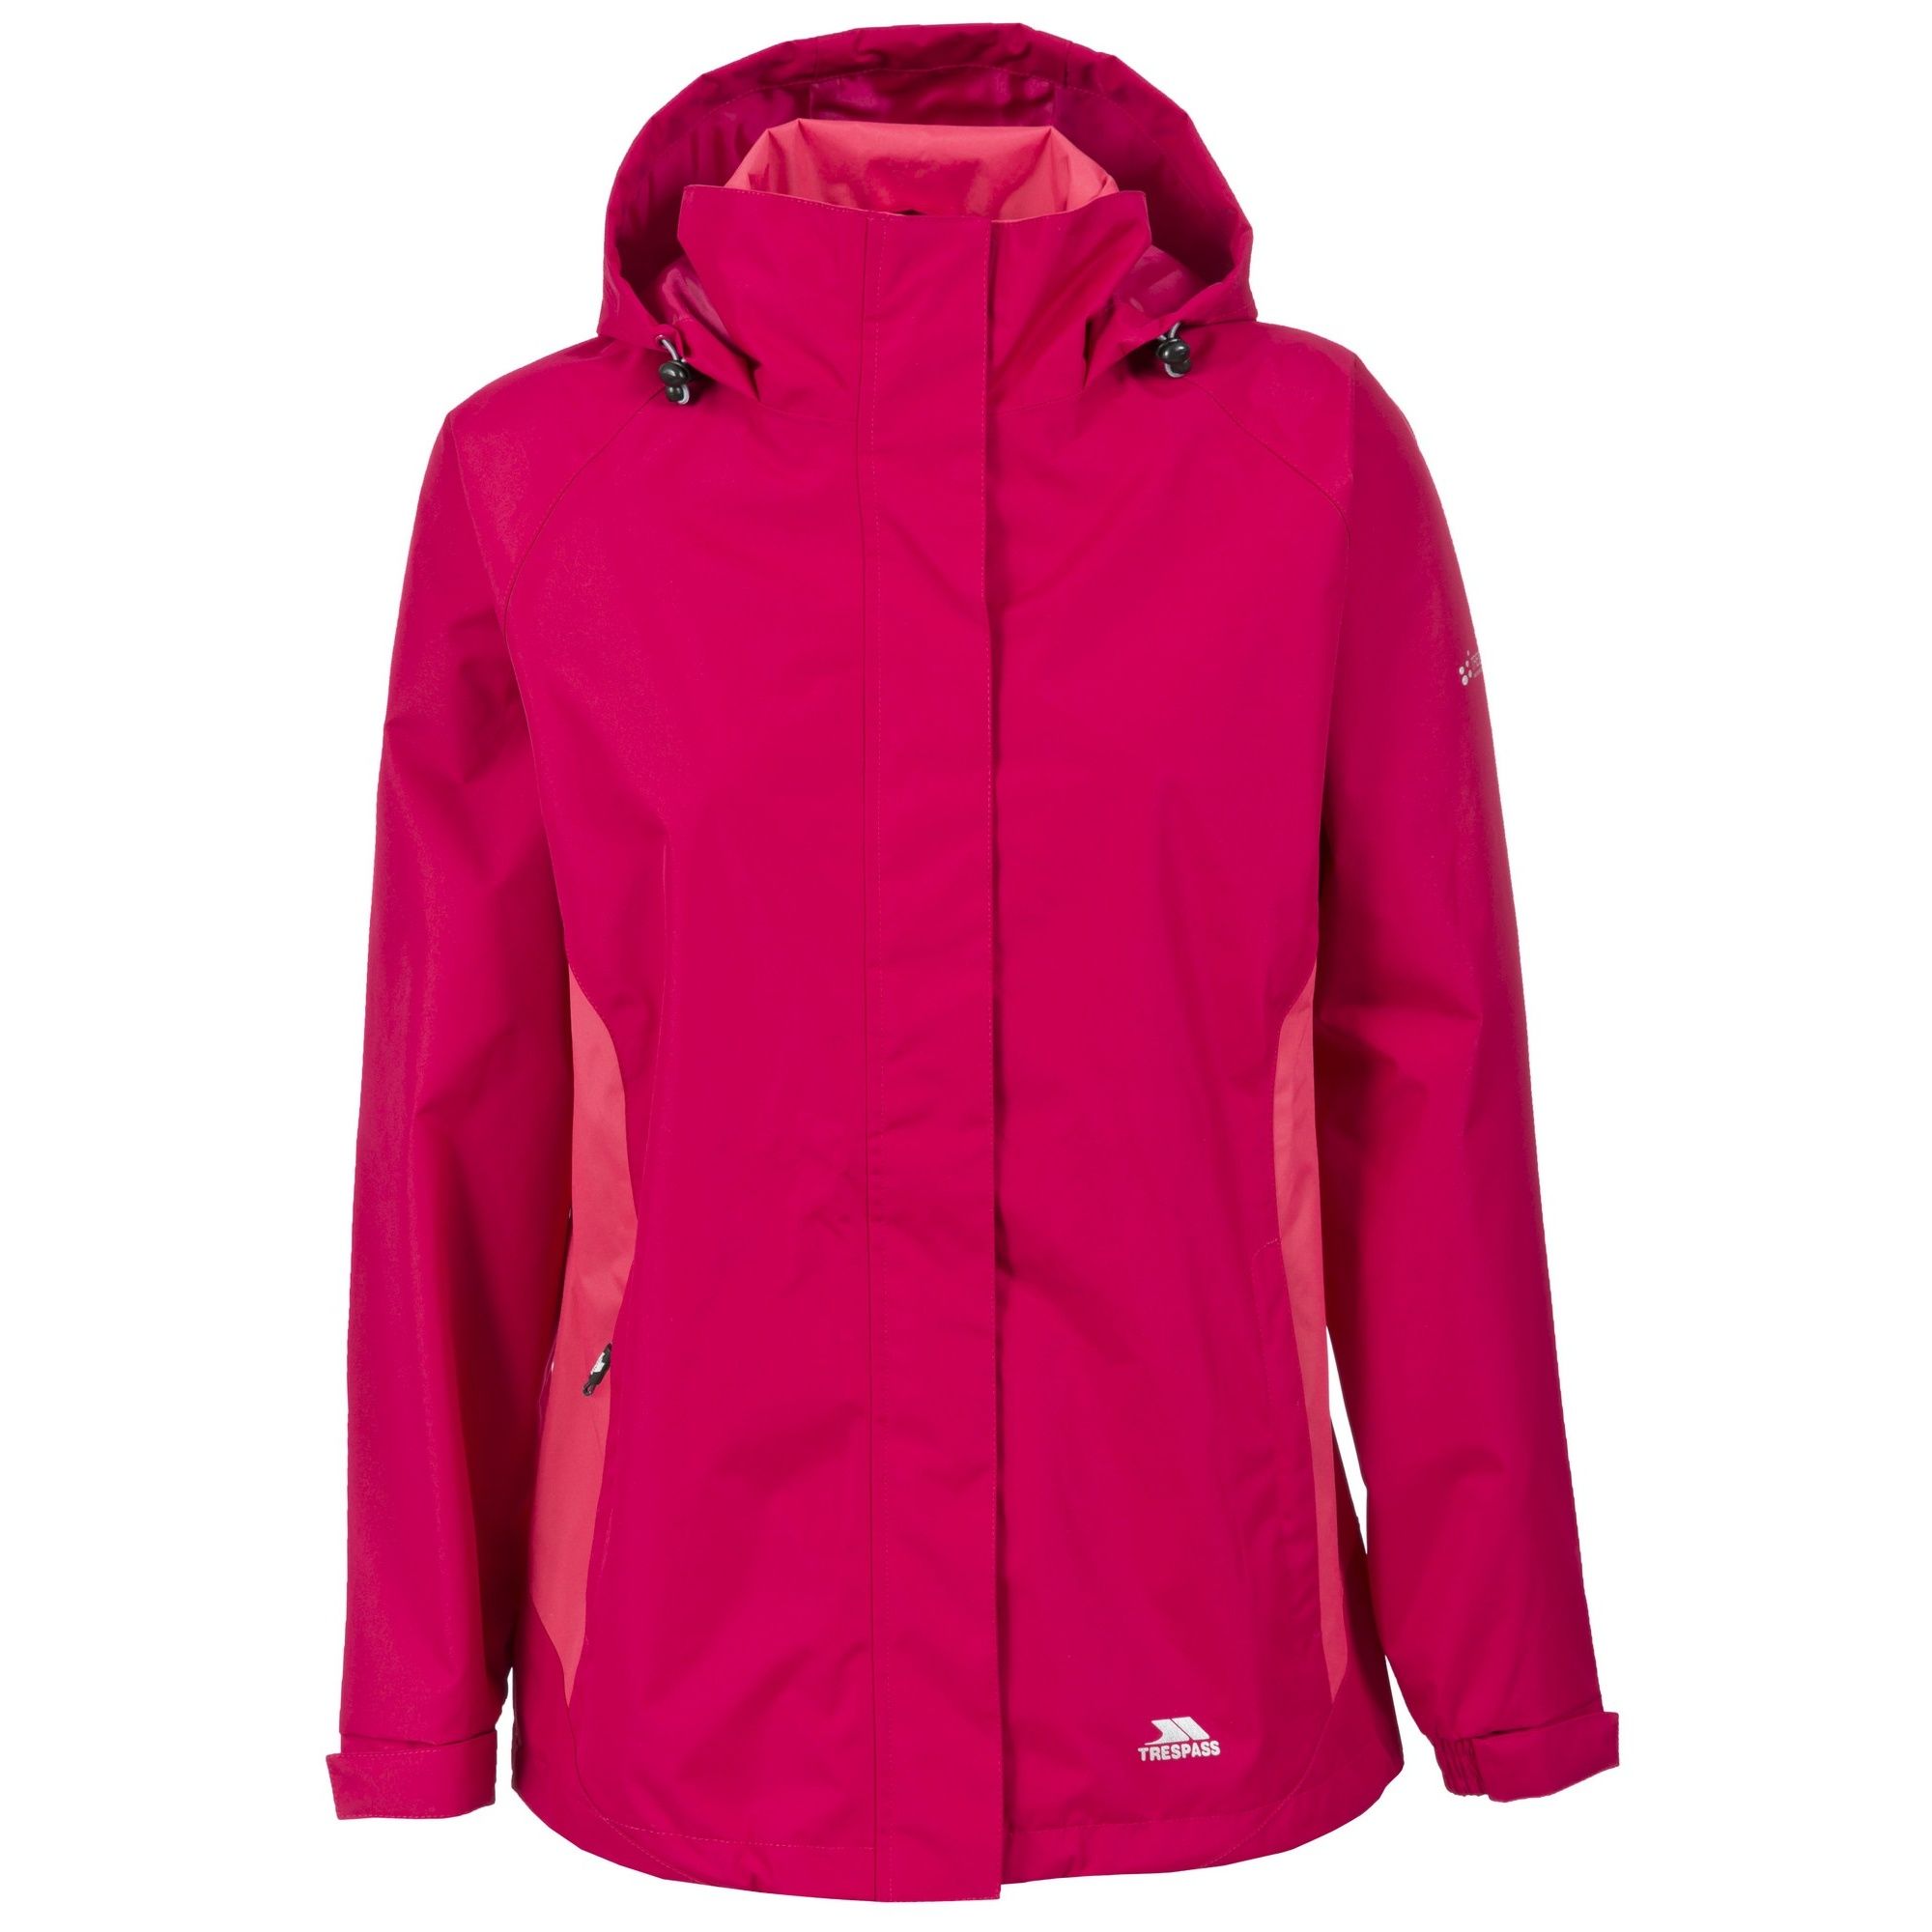 Shell jacket. Mesh lining. Adjustable concealed hood. 2 zip pockets. Adjustable drawcord at hem. Elasticated cuffs with tab adjuster. Waterproof 3000mm, windproof, taped seams. Shell: 100% Polyester Pongee PVC coating, Lining: 100% Polyester mesh. Trespass Womens Chest Sizing (approx): XS/8 - 32in/81cm, S/10 - 34in/86cm, M/12 - 36in/91.4cm, L/14 - 38in/96.5cm, XL/16 - 40in/101.5cm, XXL/18 - 42in/106.5cm.